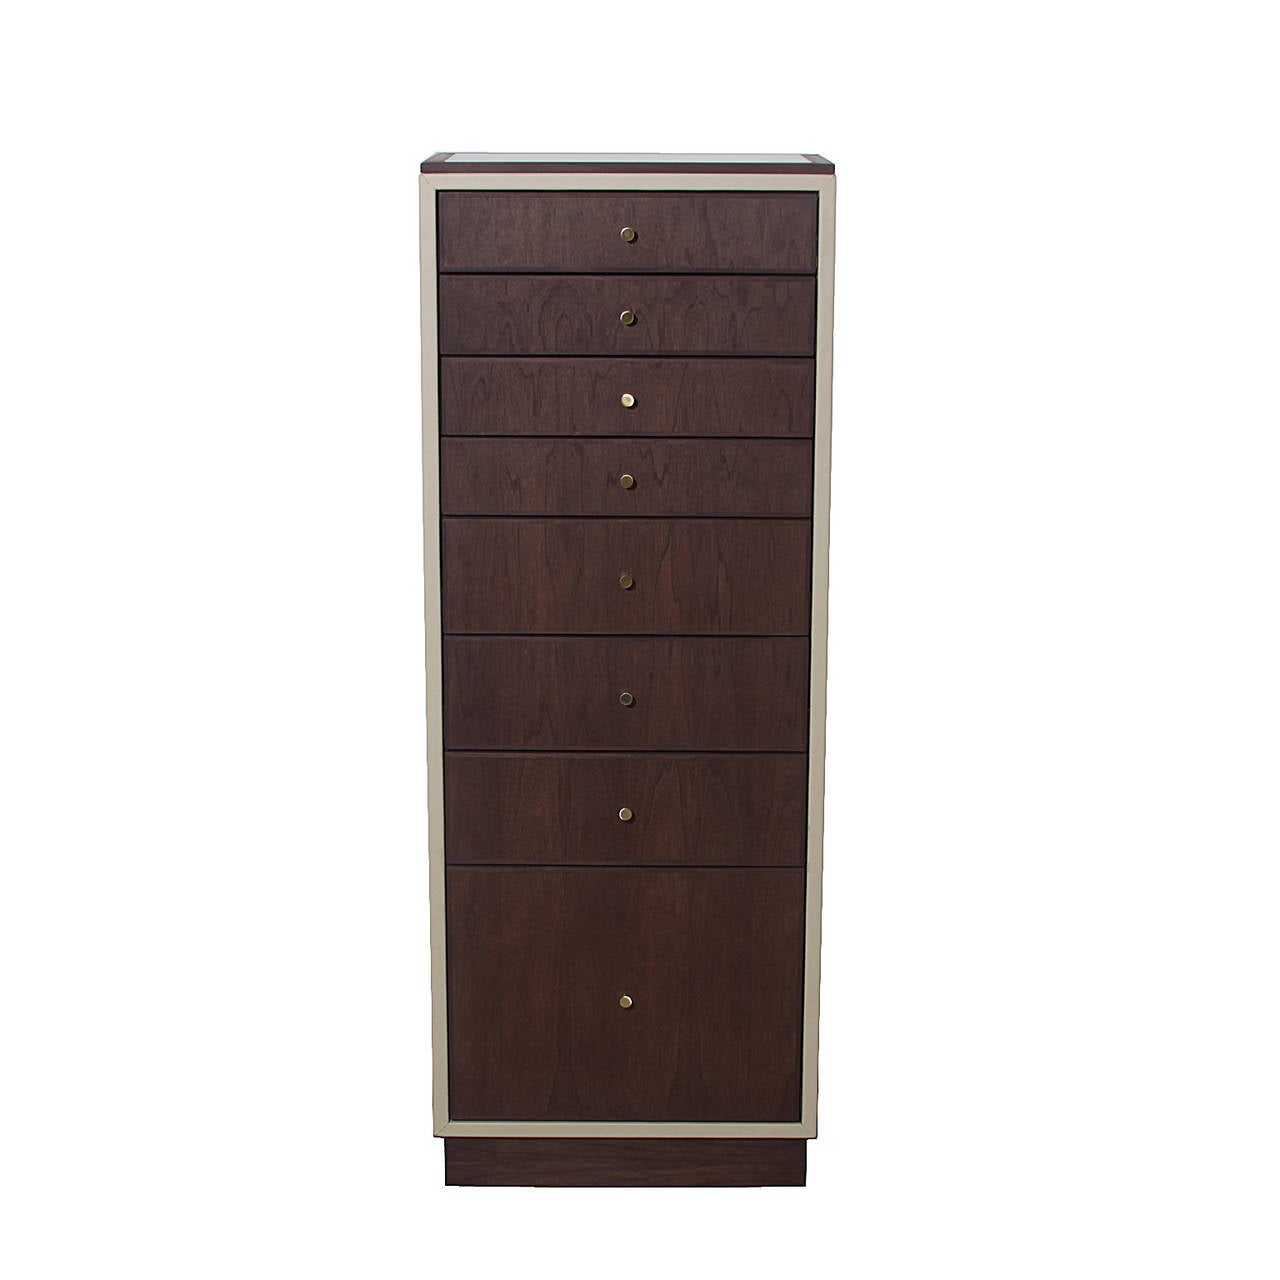 An elegant, tall, 8-drawer Walnut jewelry chest wrapped in faux leather and featuring a capiz shell inlay top. The drawers are wood veneer with solid edge banding. 

This item is available for custom order and the lead time is 6-8 weeks; sometimes